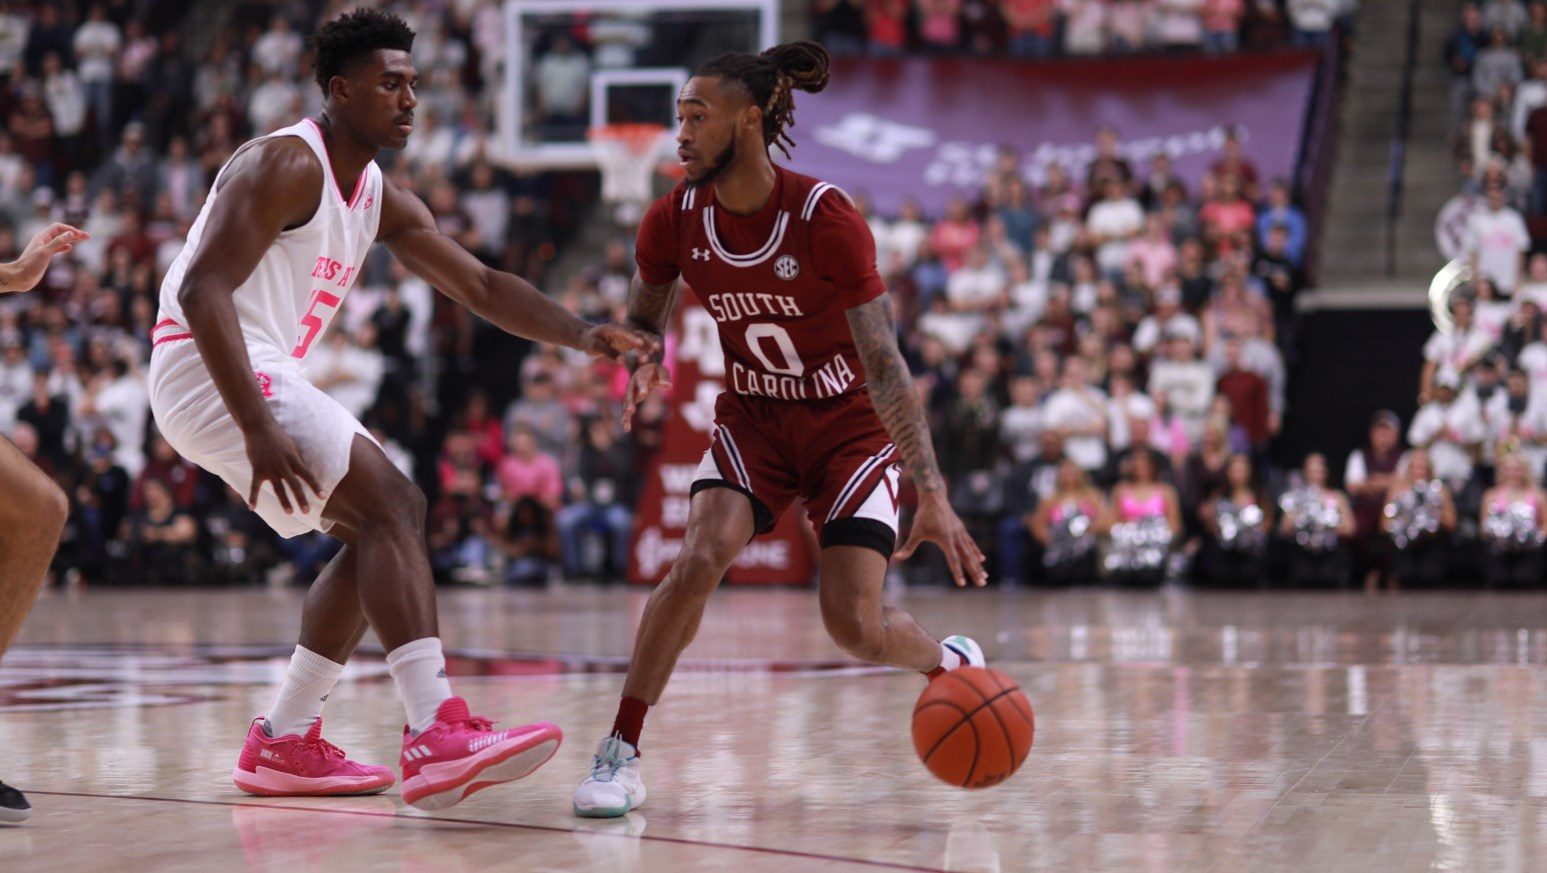 Reese scores 20, leads South Carolina over Texas A&M 74-63